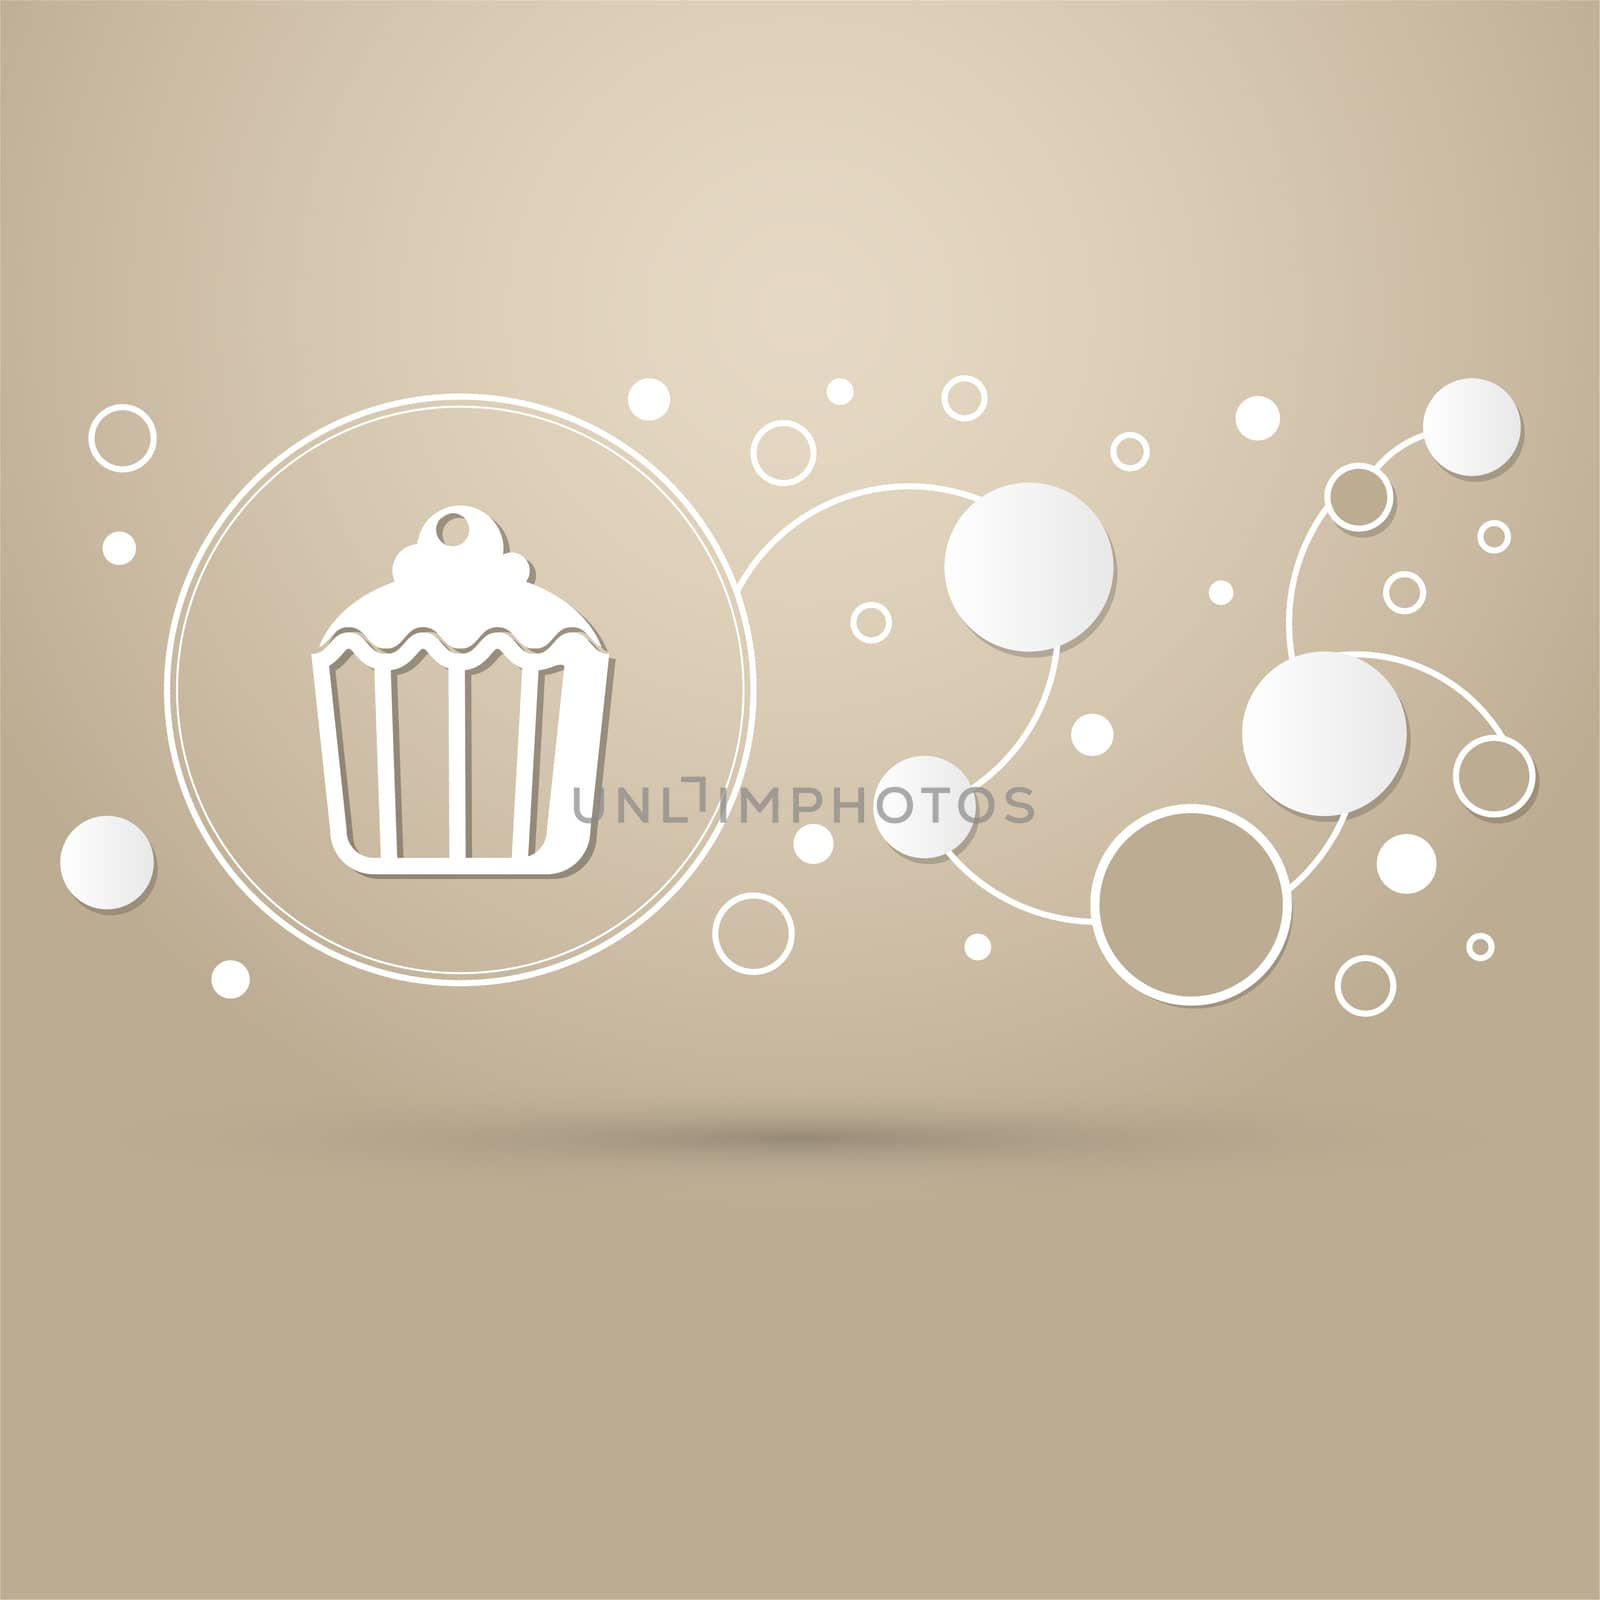 cupcake, muffin icon on a brown background with elegant style and modern design infographic. illustration